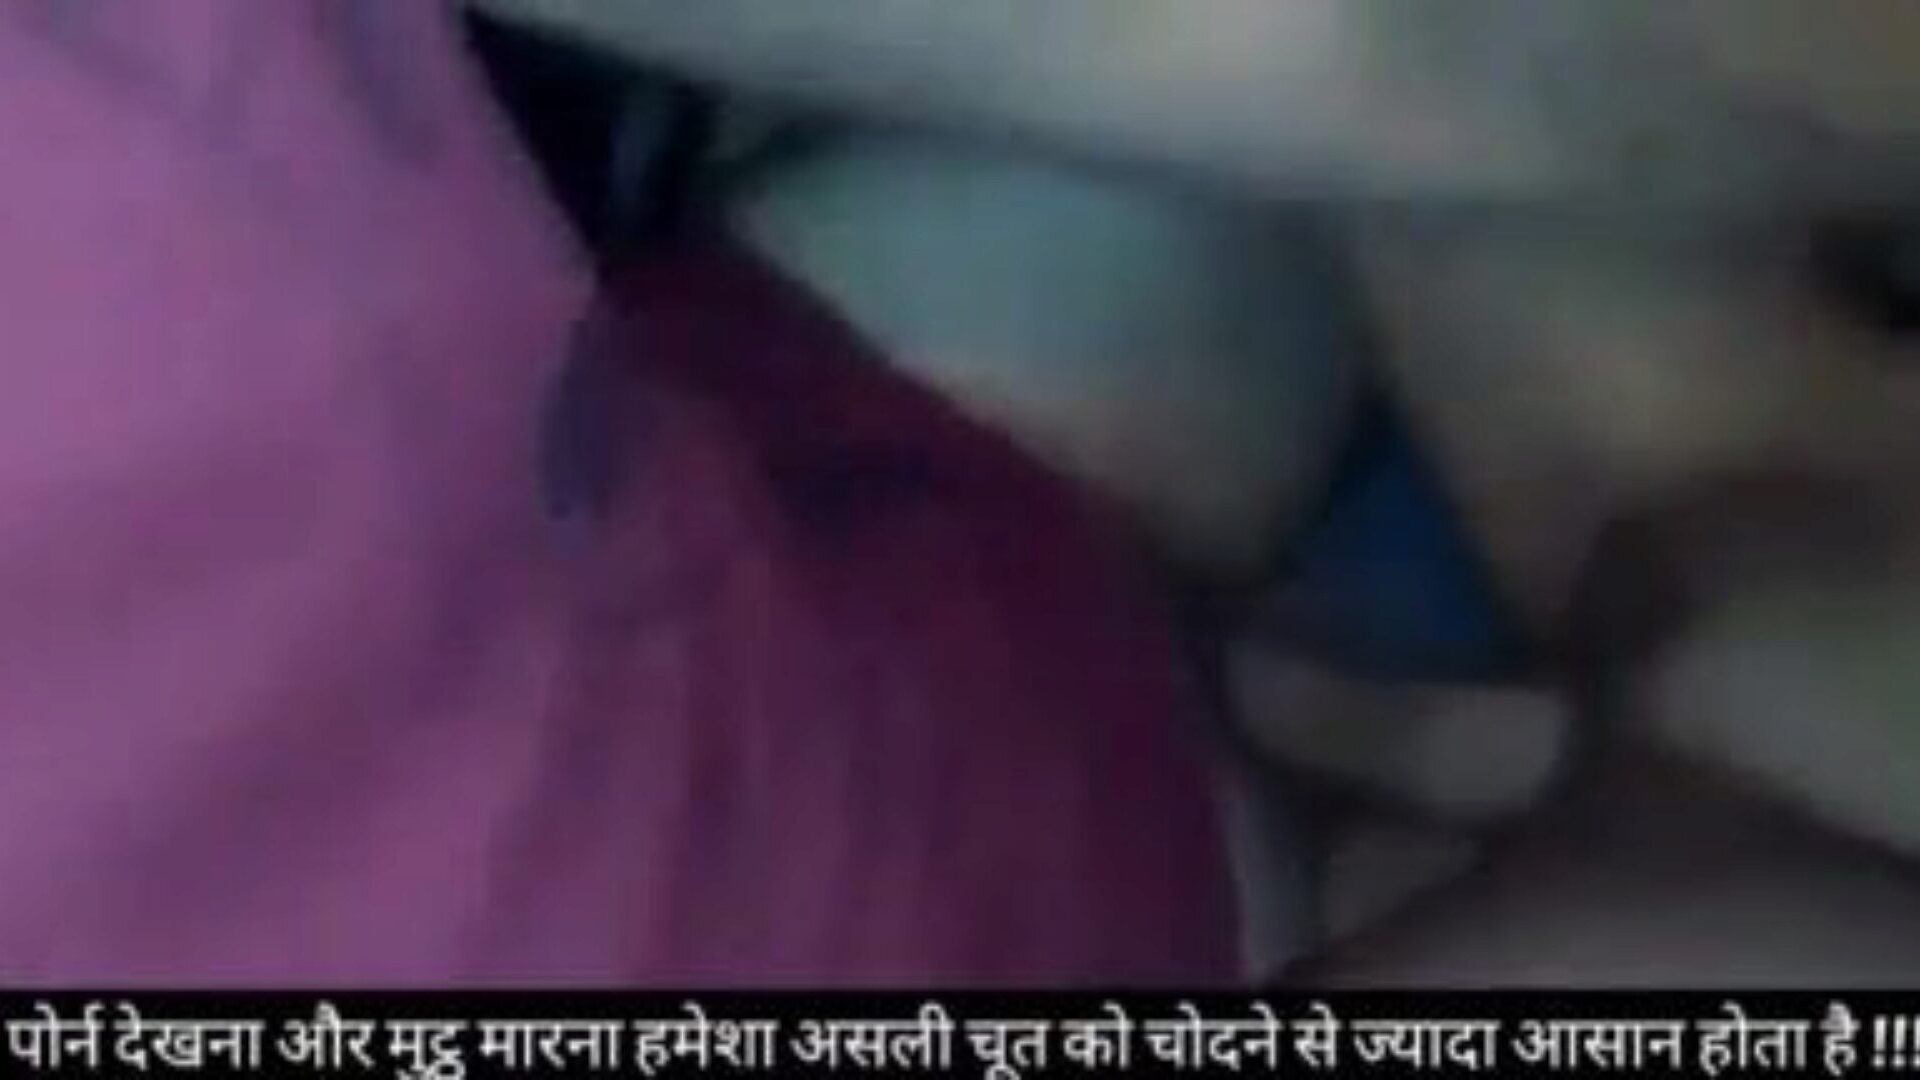 Indian Tiktok Girl Miss Pooja Newly Leaked Video: Porn 10 Watch Indian Tiktok Girl Miss Pooja Newly Leaked Video episode on xHamster - the ultimate selection of free-for-all Indian Mobile & Xxx Indian Free porn tube episodes